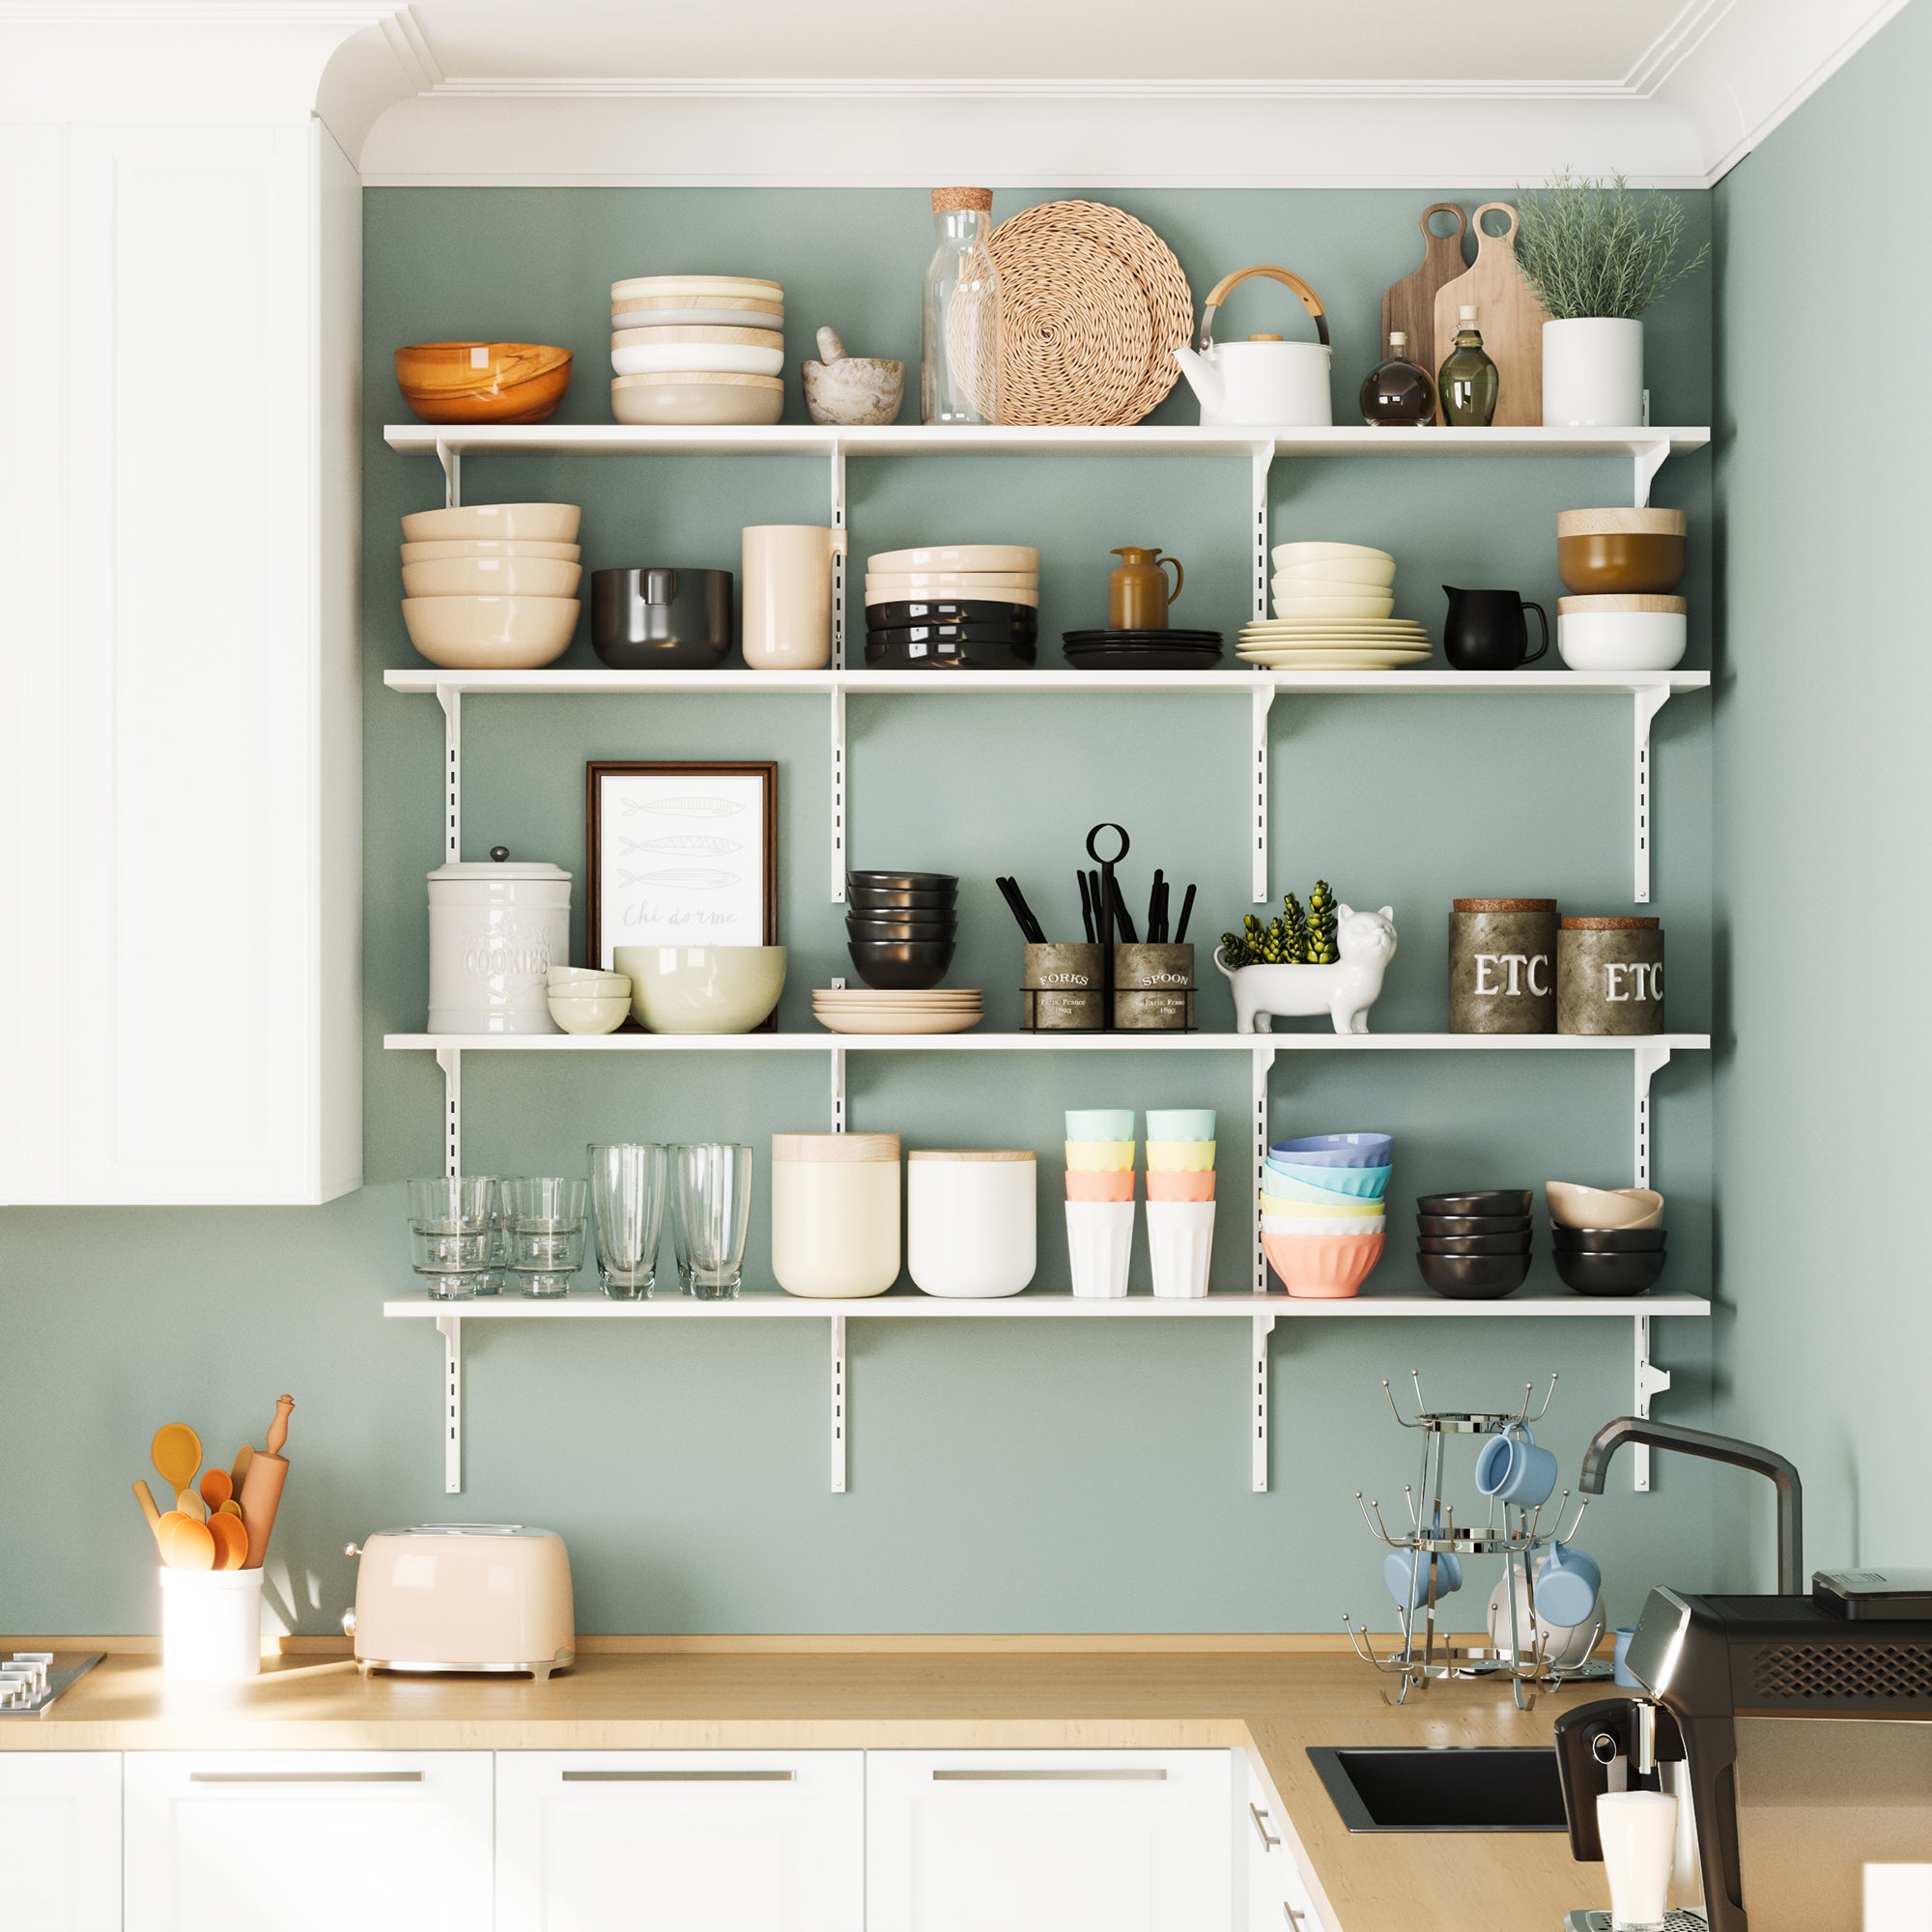 A kitchen wall fitted with multiple white adjustable shelves, neatly arranged with various kitchen items including plates, bowls, cups, and utensils, complementing the space's modern aesthetic.